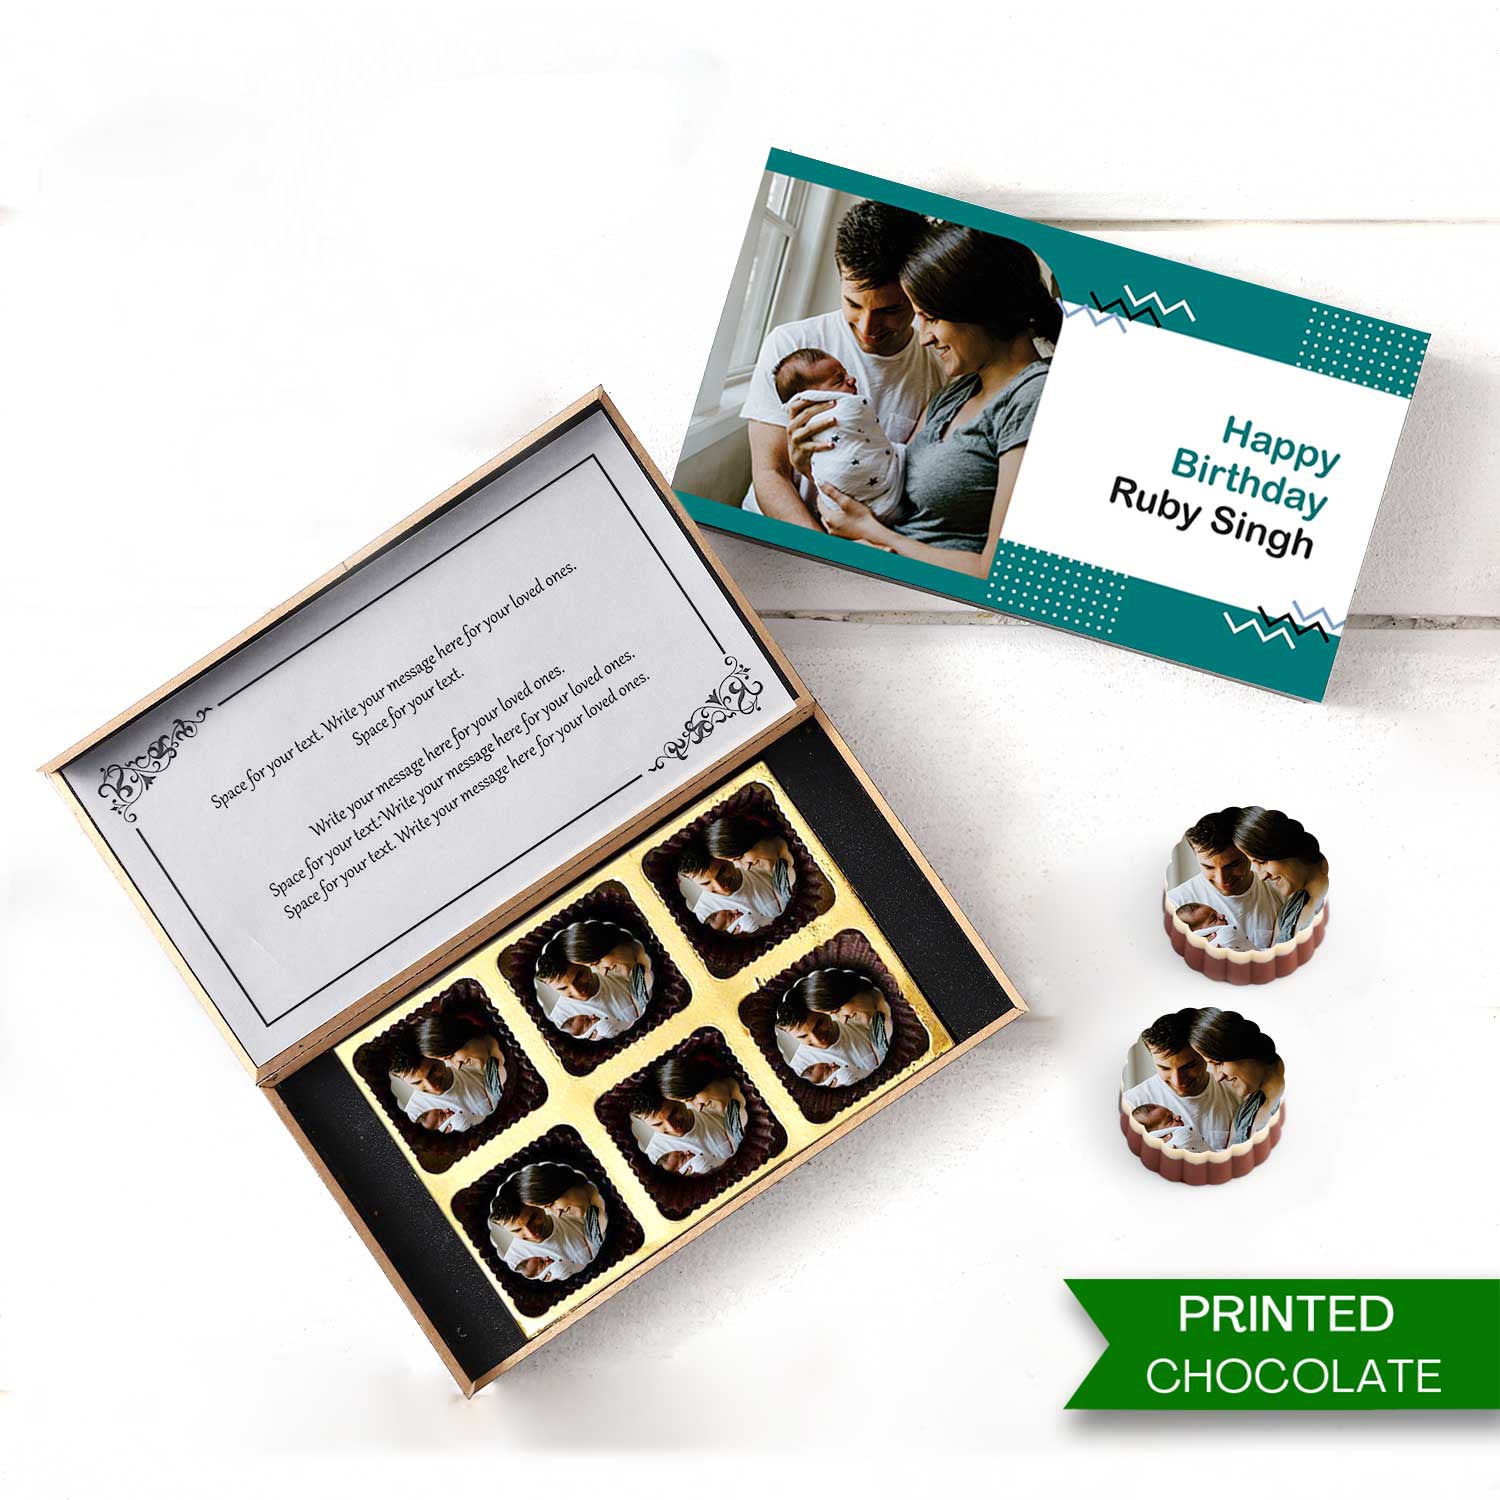 Chocolate with Photo Printed on it